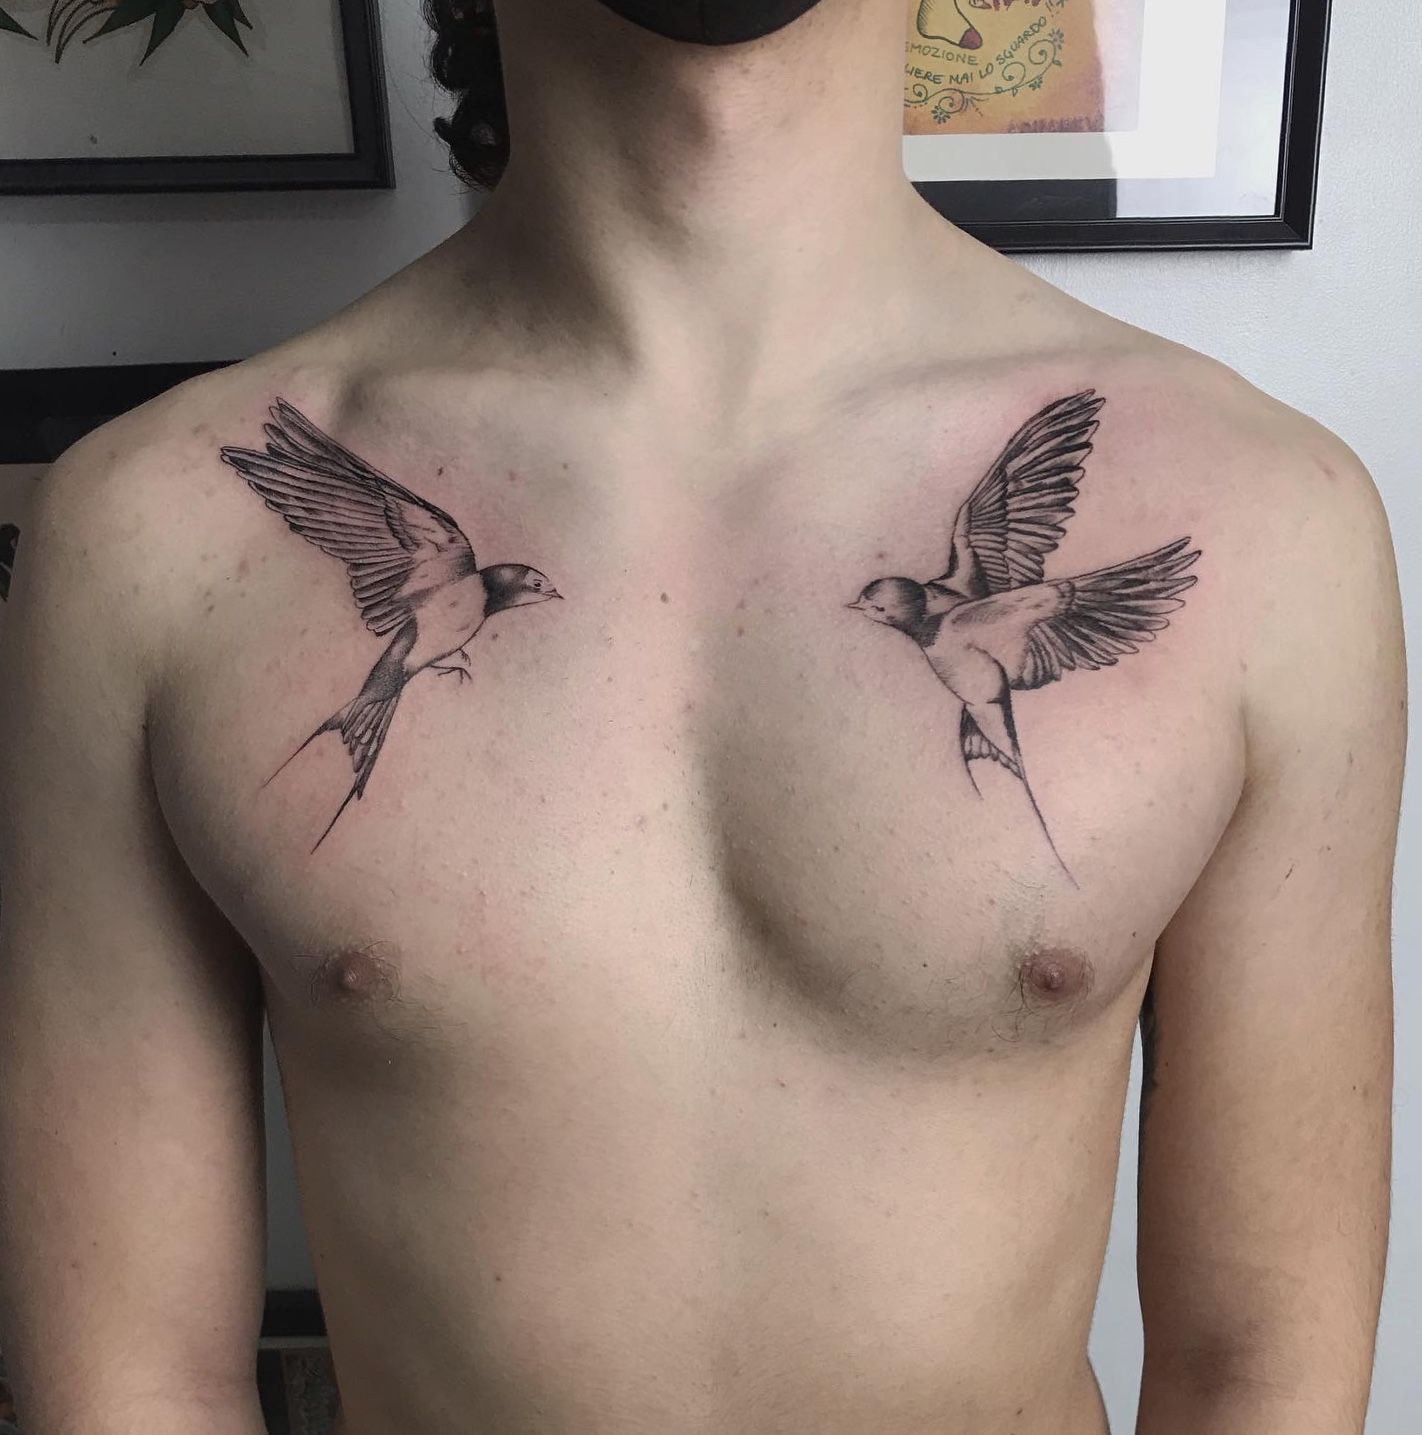 Swallows on the chest for his first tattoo approx 35 hours done by me  Alexander Apprentice  Sea Of Trees Tattoo  Barber Chilliwack BC   CC always welcome  rtattoo